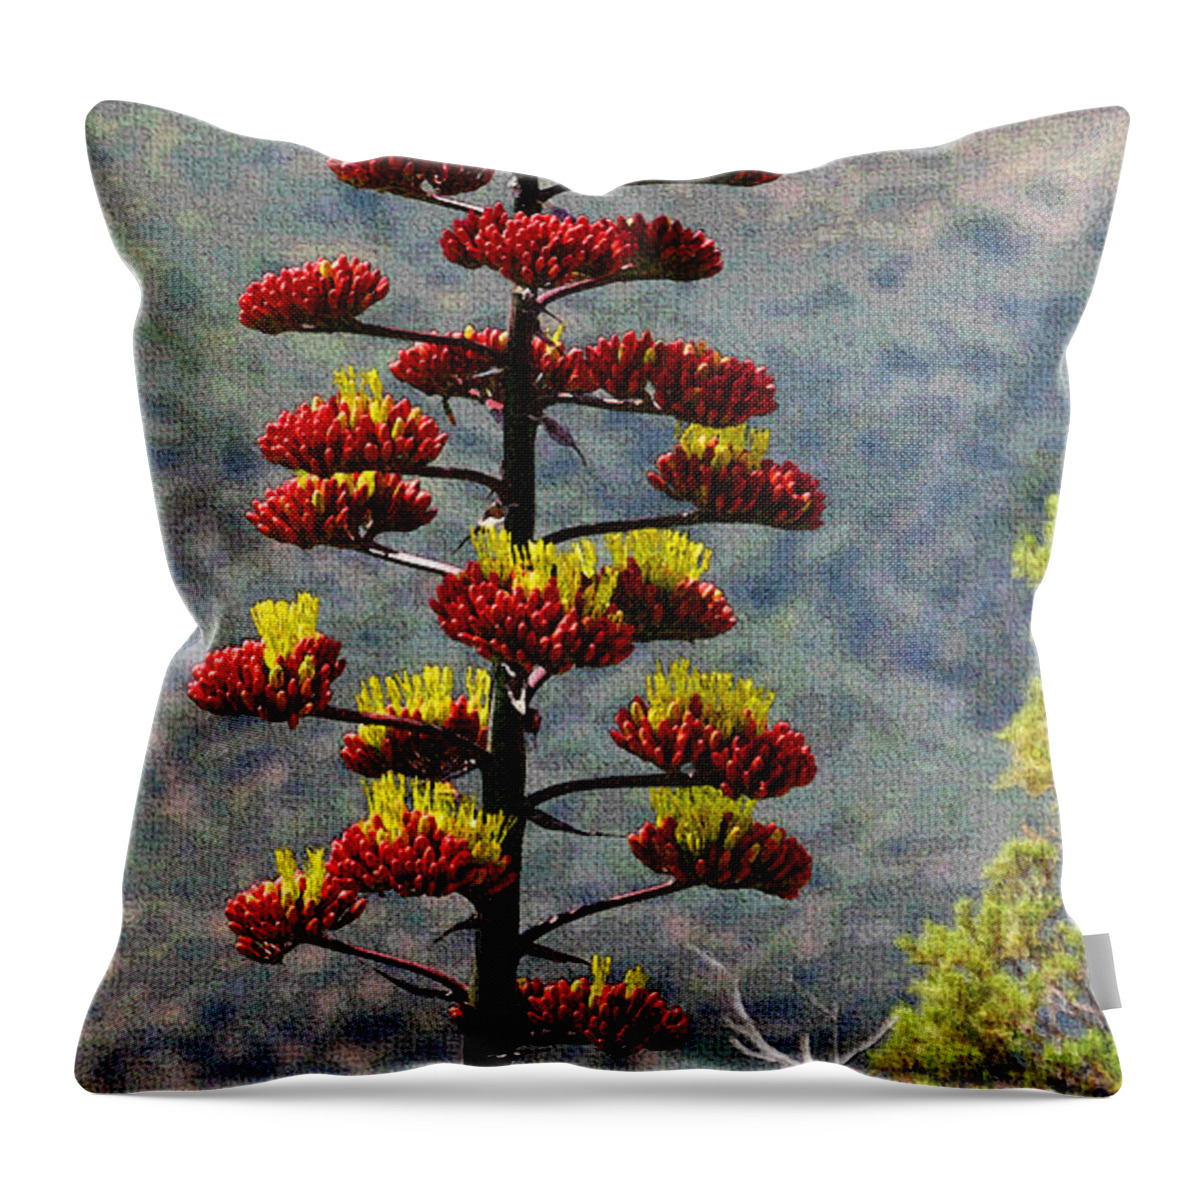 Red Bud Agave Yellow Flowers Throw Pillow featuring the photograph Red Bud Agave Yellow Flowers by Tom Janca